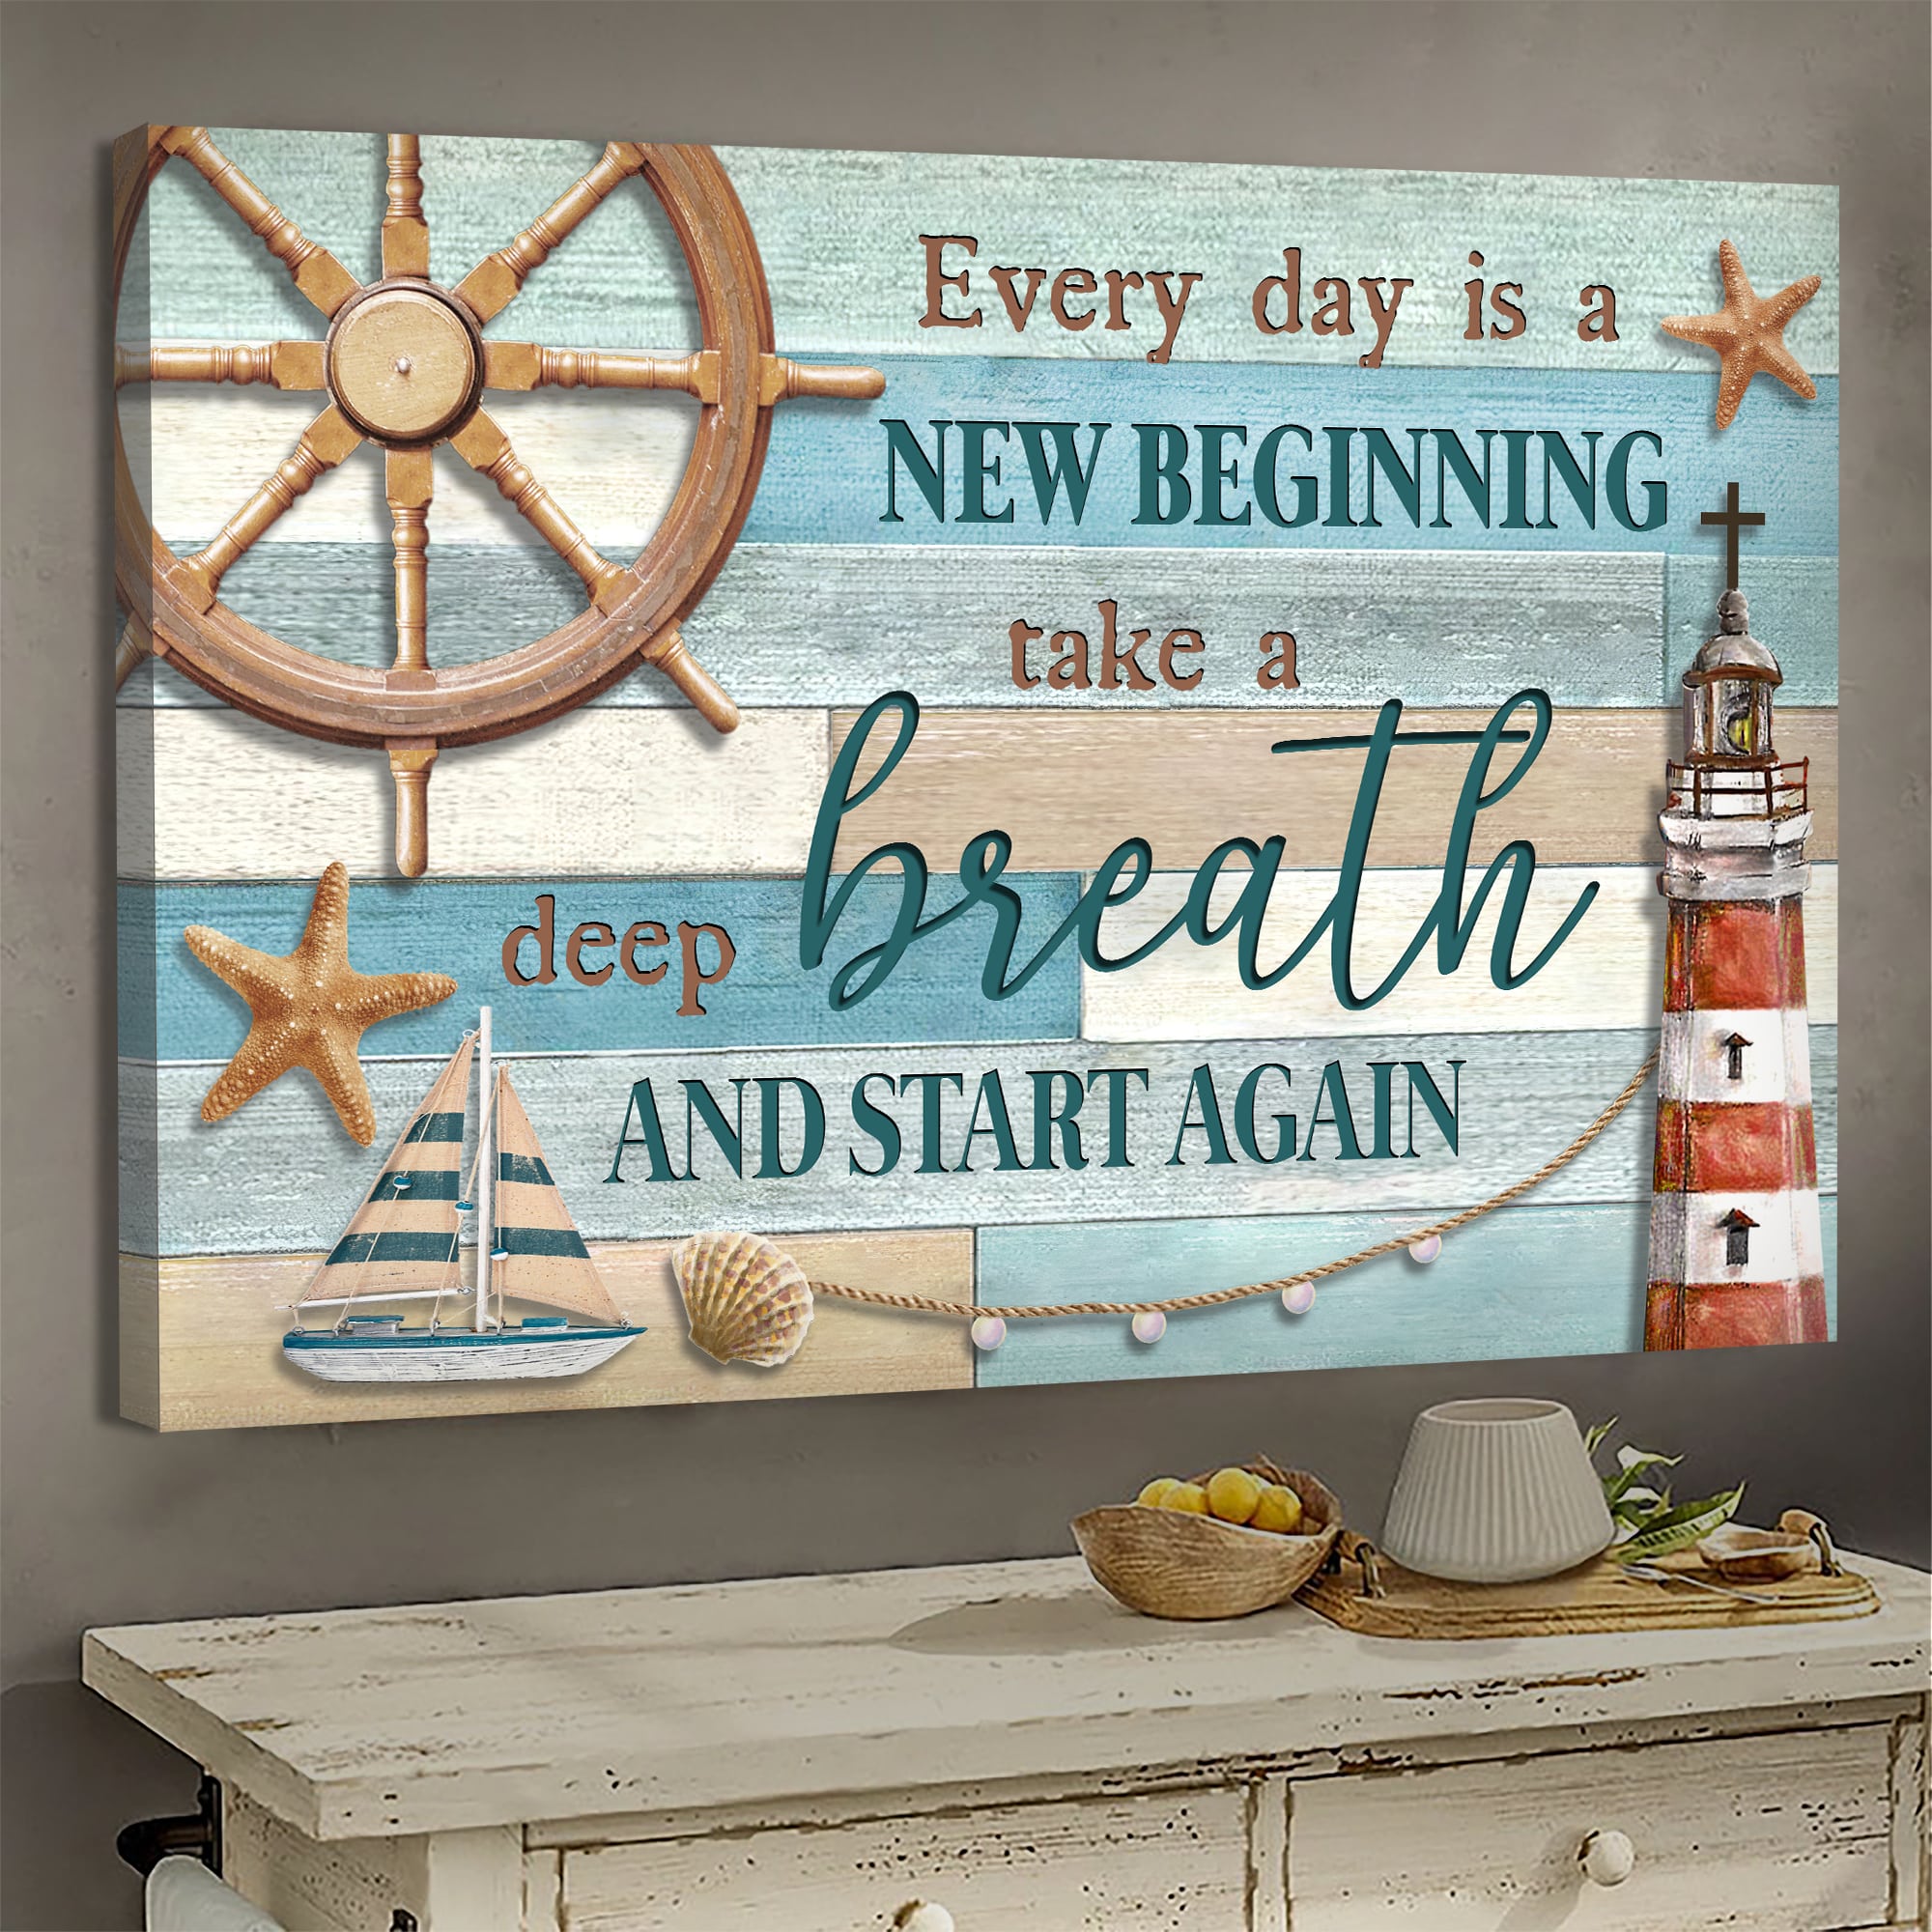 Lighthouse, Helm, Boat, Every day is a new beginning - Jesus Landscape Canvas Prints, Wall Art